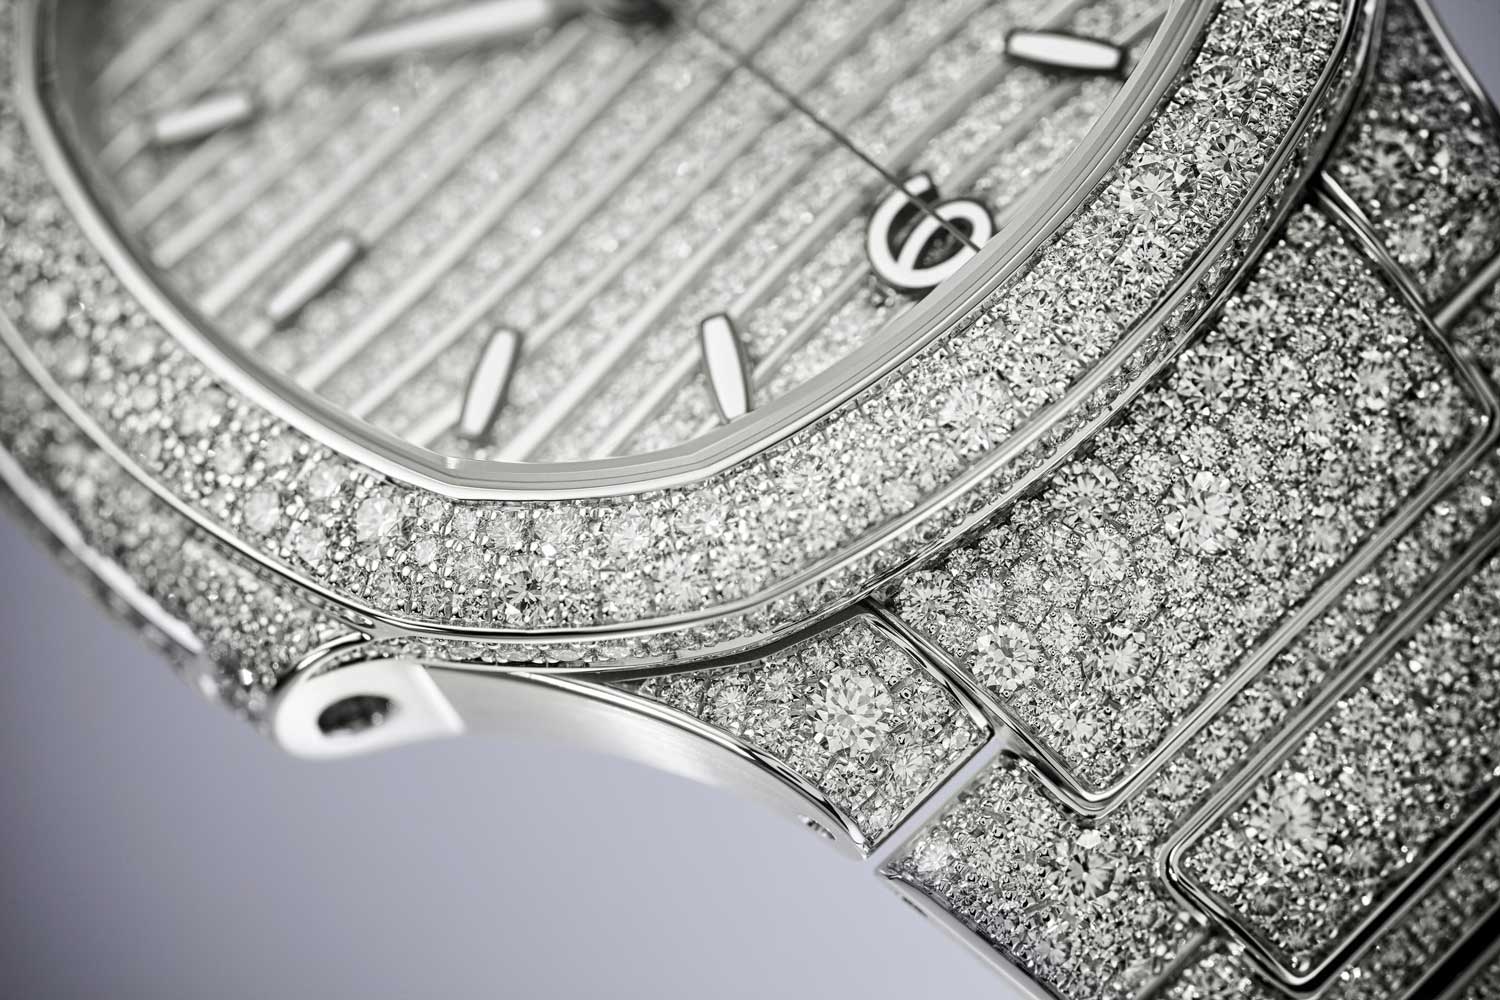 Patek Philippe combines high watchmaking artistry with delicate and rare handcrafts, in this case with gem setting. The ref. 7118/1450G-001 has over 12.6 carats of diamonds on the dial, case and the bracelet.